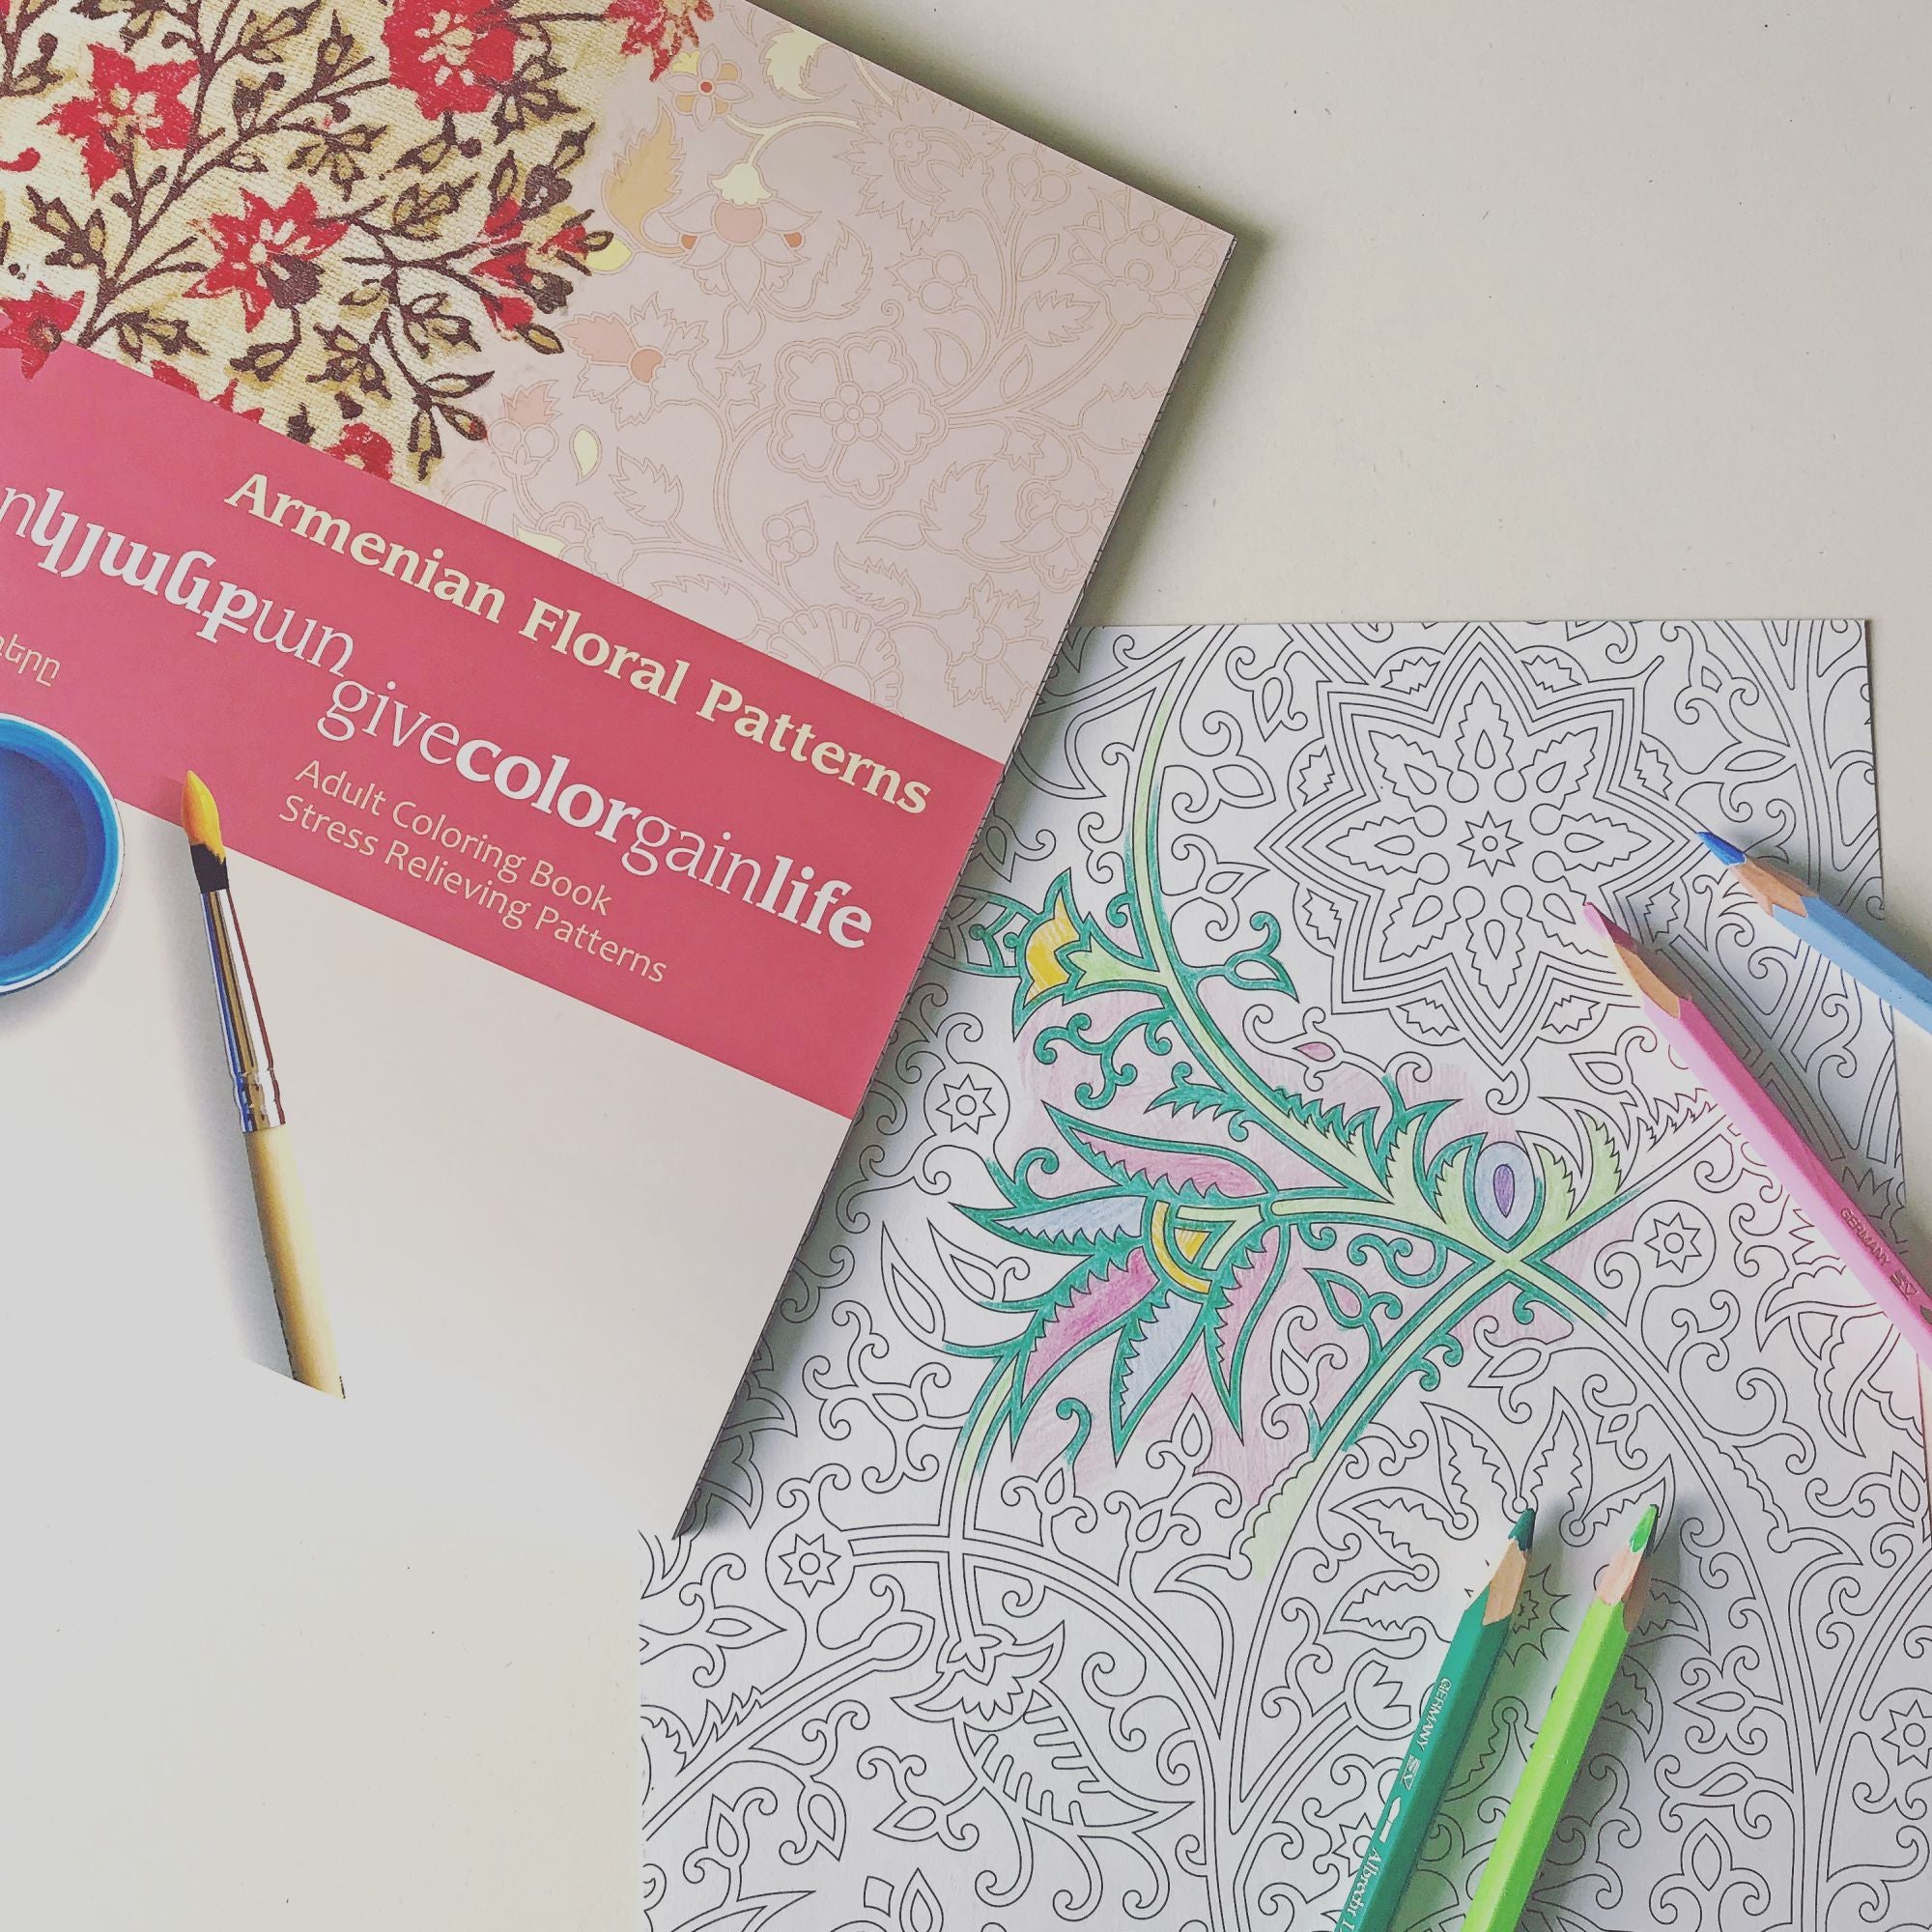 Give Color, Gain Life - Armenian Floral Patterns - Coloring Book